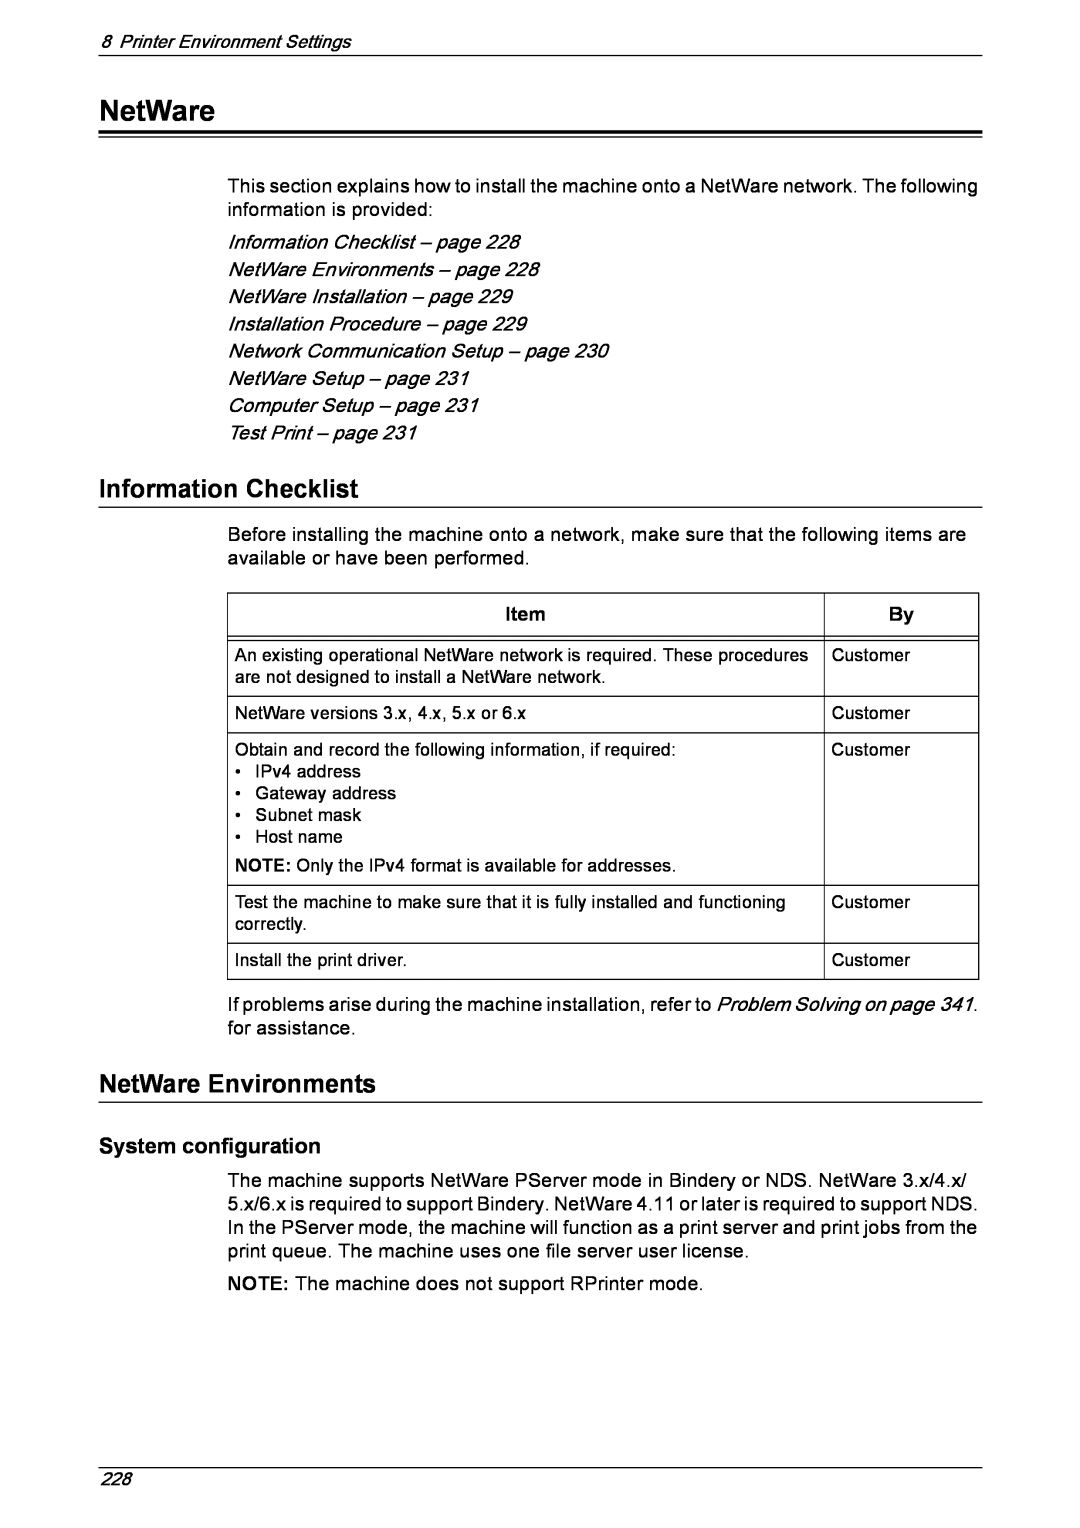 Xerox 5222 manual Information Checklist – page, NetWare Environments – page, NetWare Installation – page, Item 